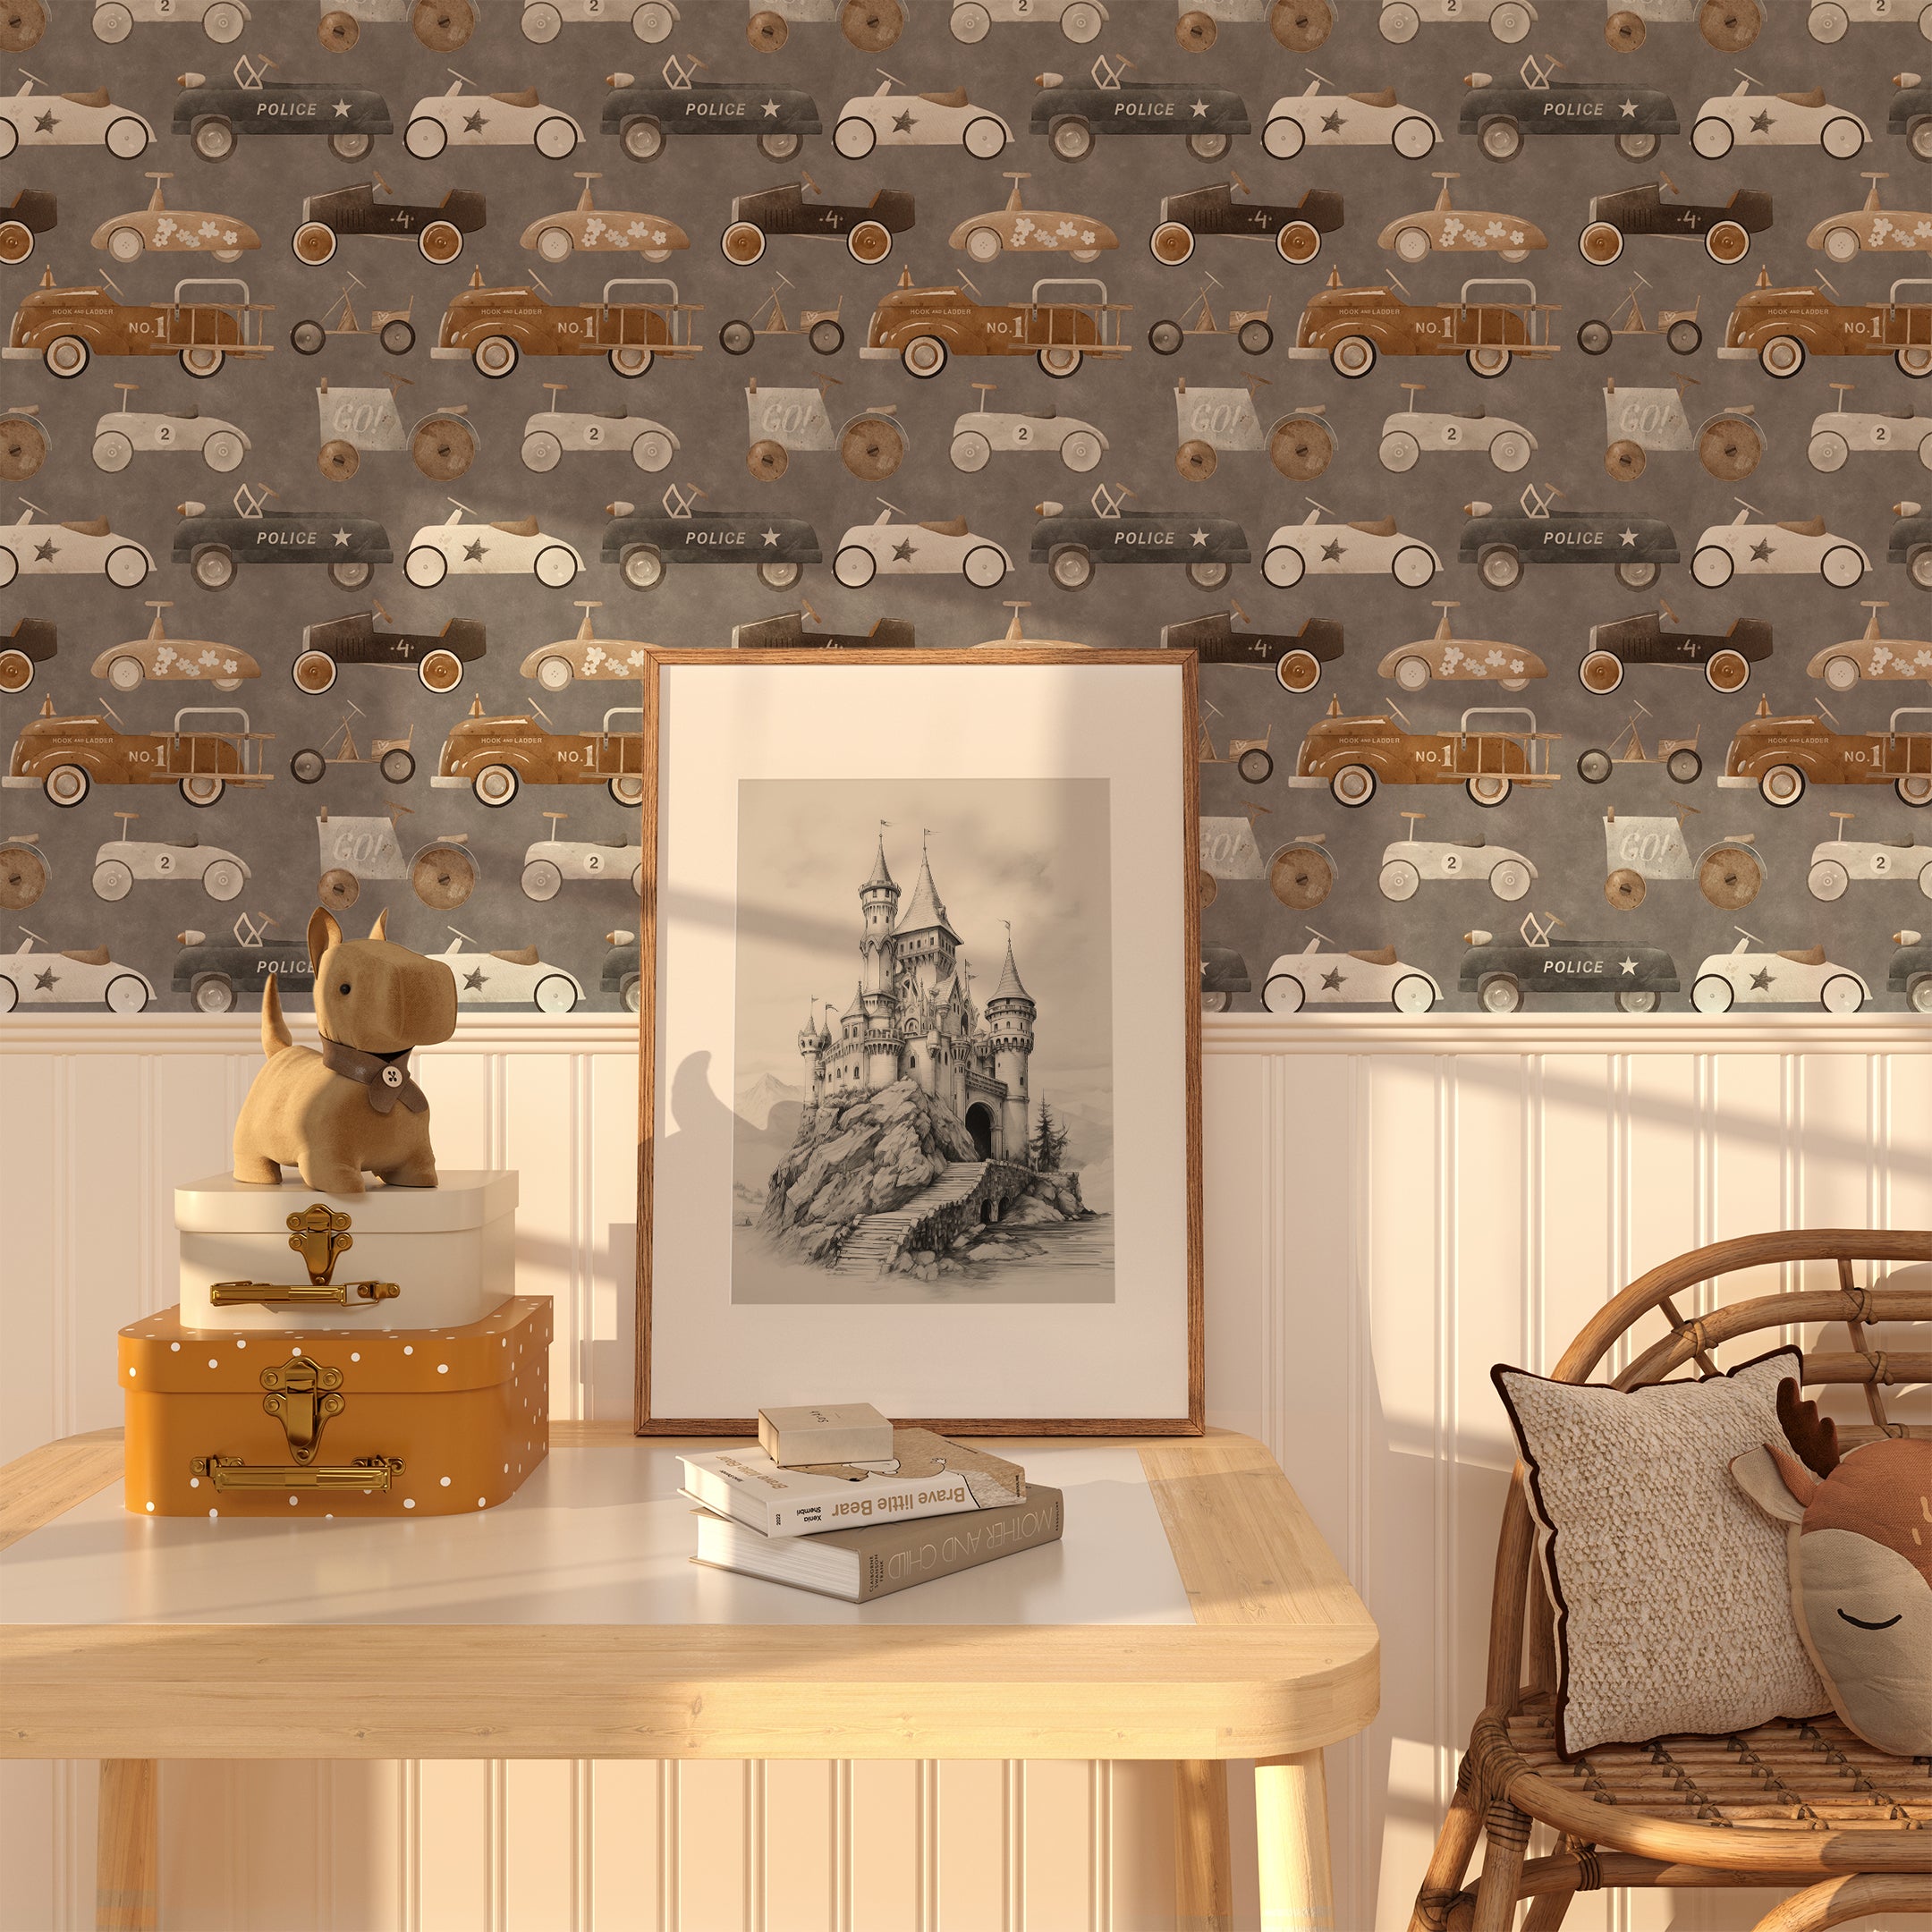 A charming room with the Retro Wheels Wallpaper adorning the walls. The wallpaper displays a repeating pattern of vintage cars in brown, gray, and white. A wooden table with a framed sketch of a castle, a plush dog toy, and a stack of books is placed against the wall.